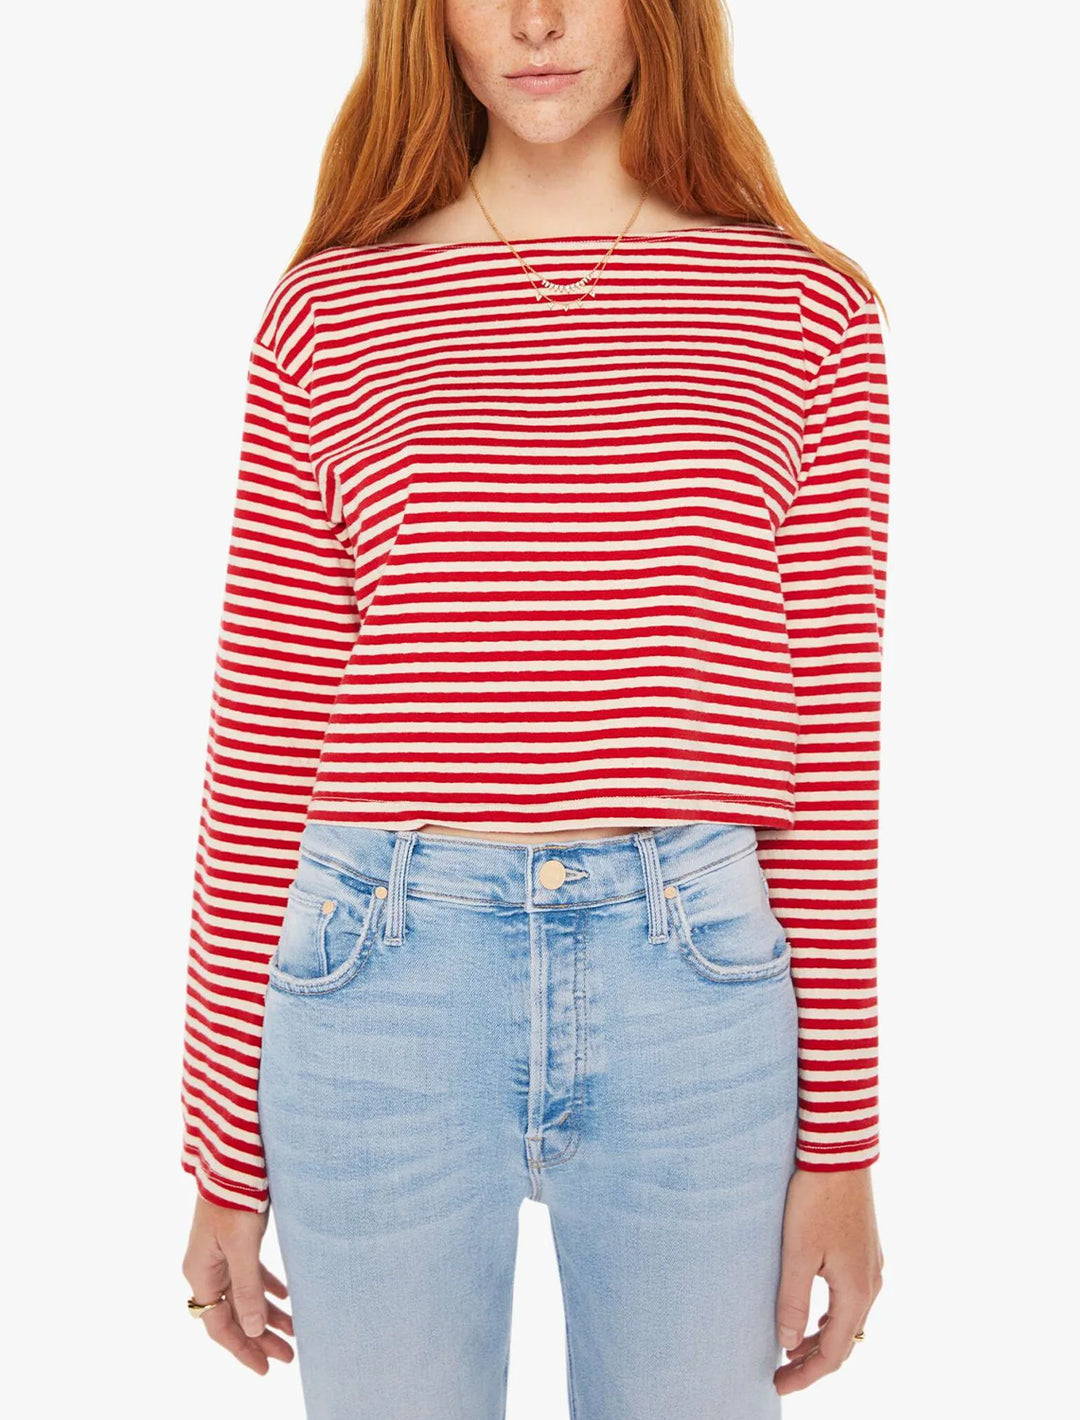 Model wearing Mother Denim's the skipper bell tee in red and natural stripe.